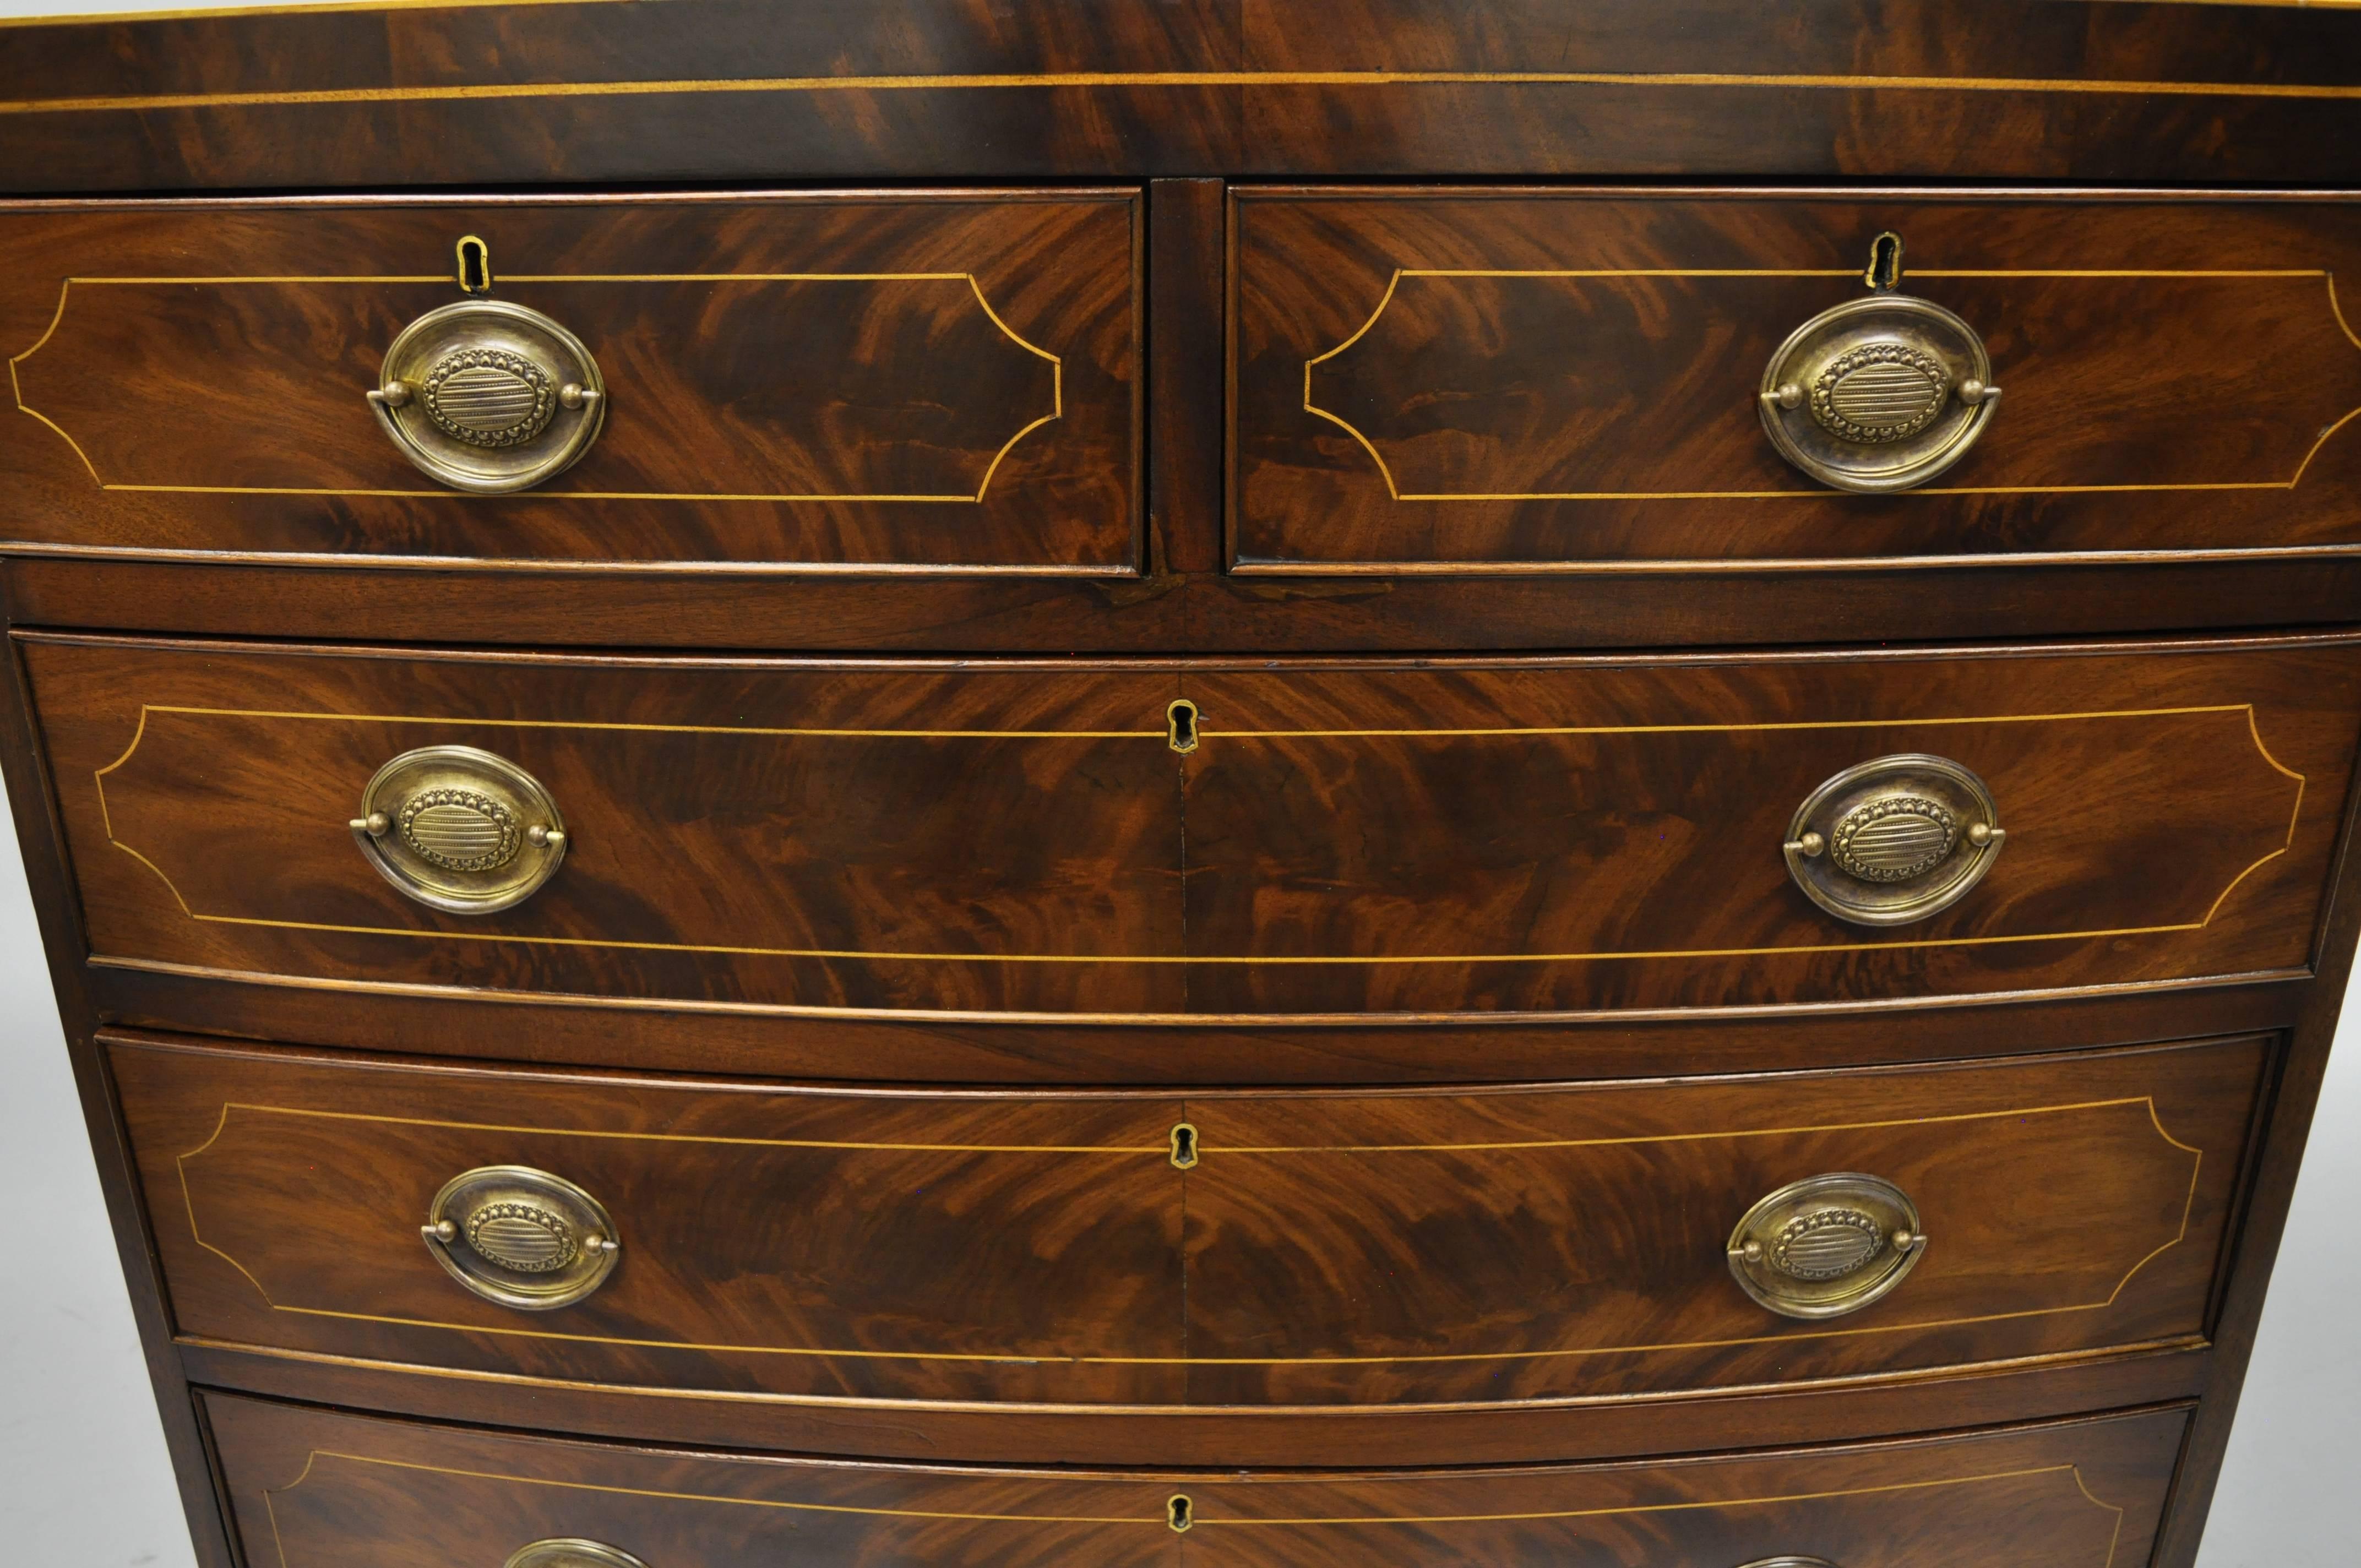 Antique mahogany American Federal inlaid five-drawer chest. Item features beautiful flamed / crotch mahogany veneers, satinwood pencil inlay, five dovetailed drawers, bow front, brass hardware, panel wood backing, all drawers have locks which are